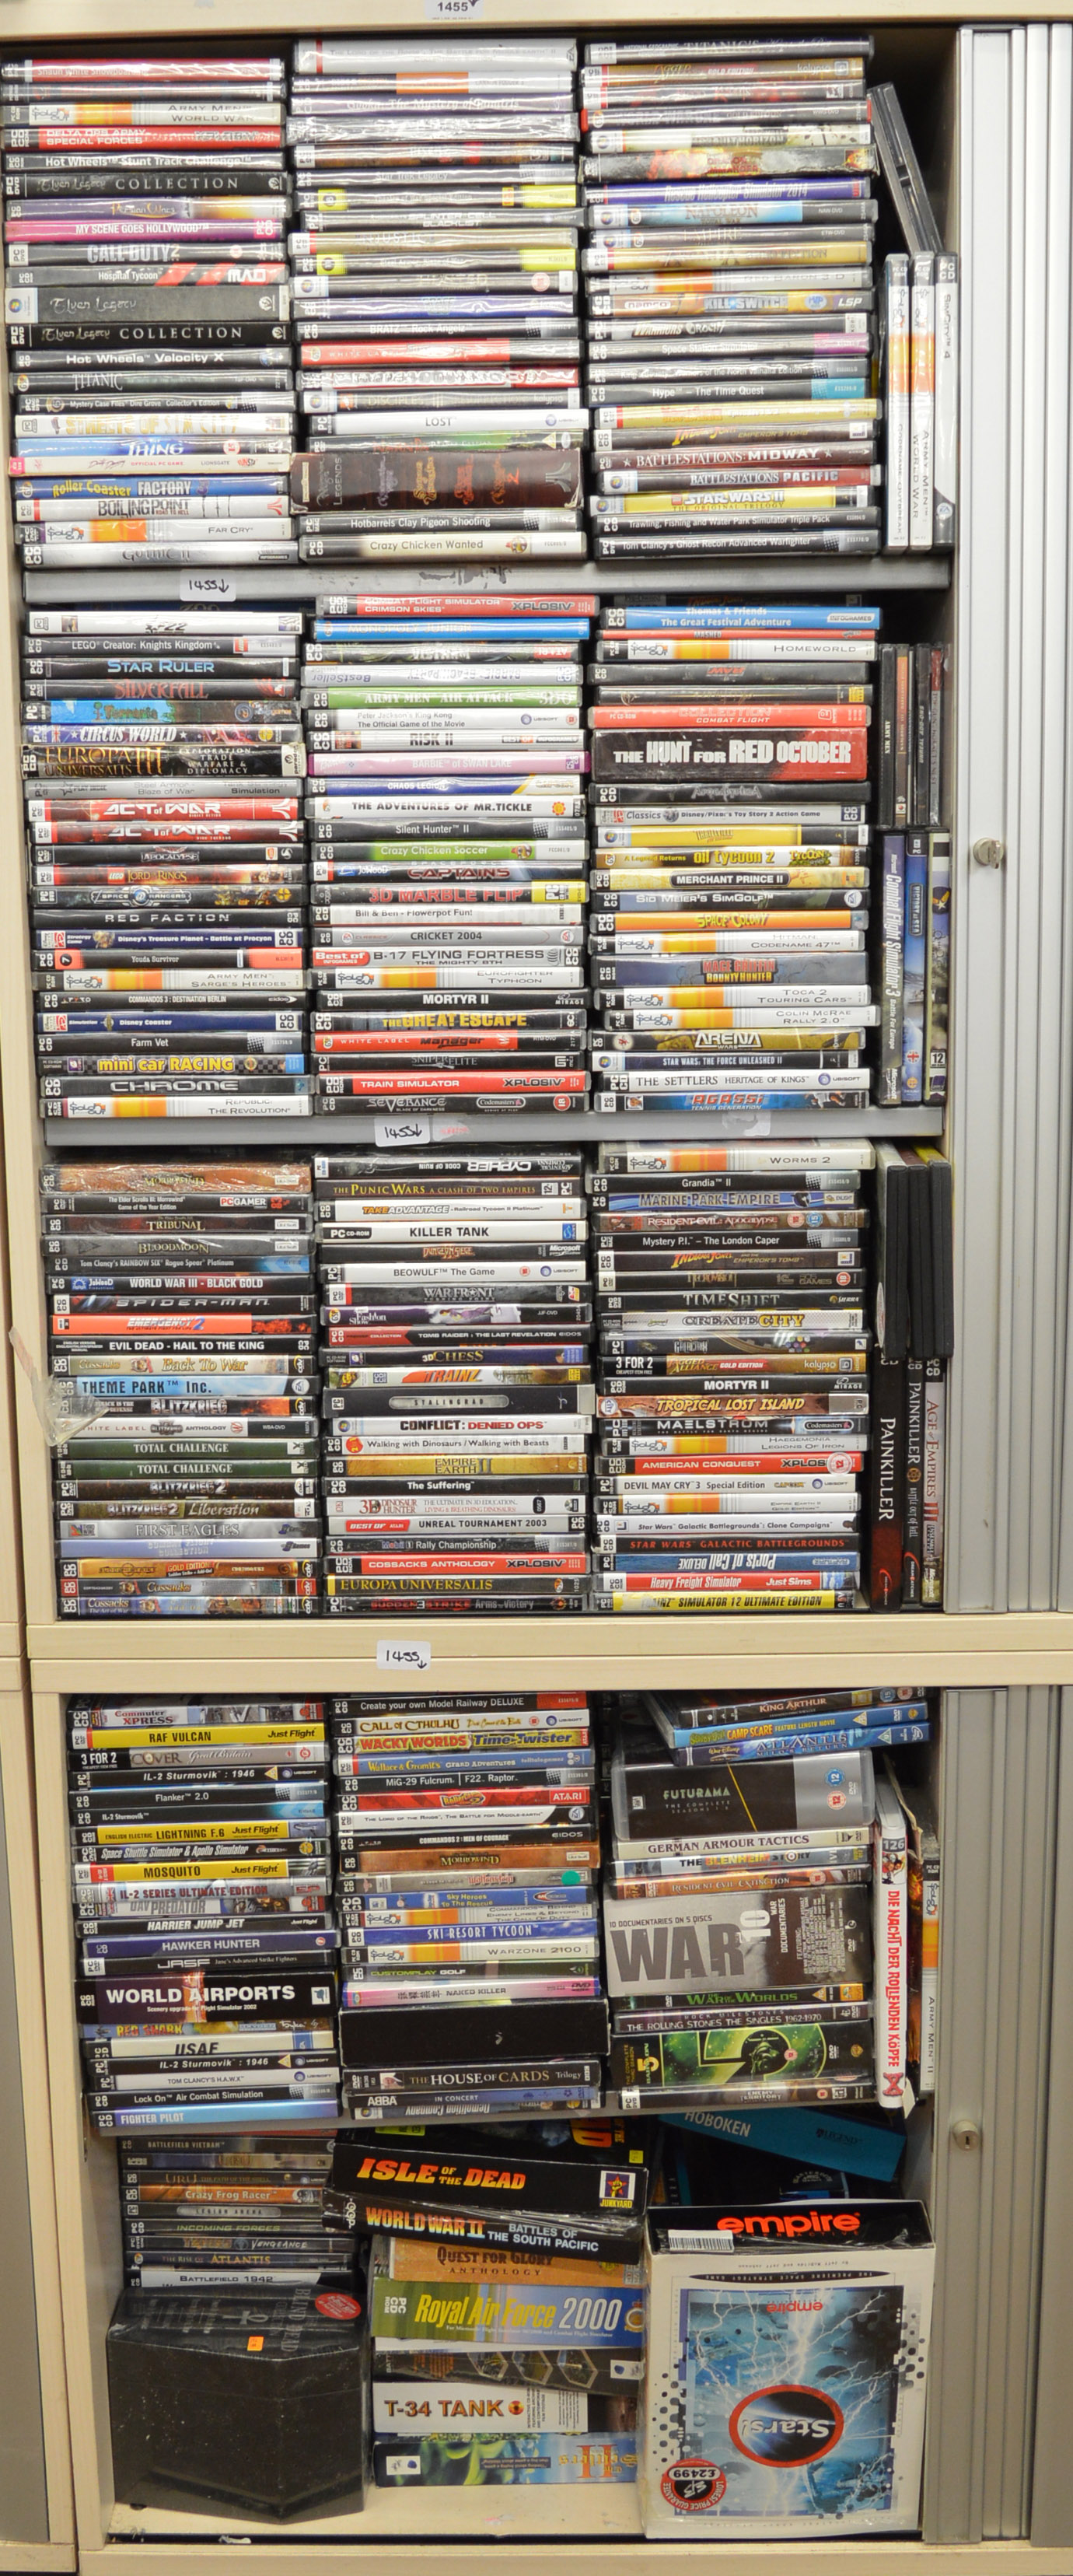 Over 800 PC games which includes; Call Of Duty 2, Lost, Star Wars, Indiana Jones, Evil Dead, Theme